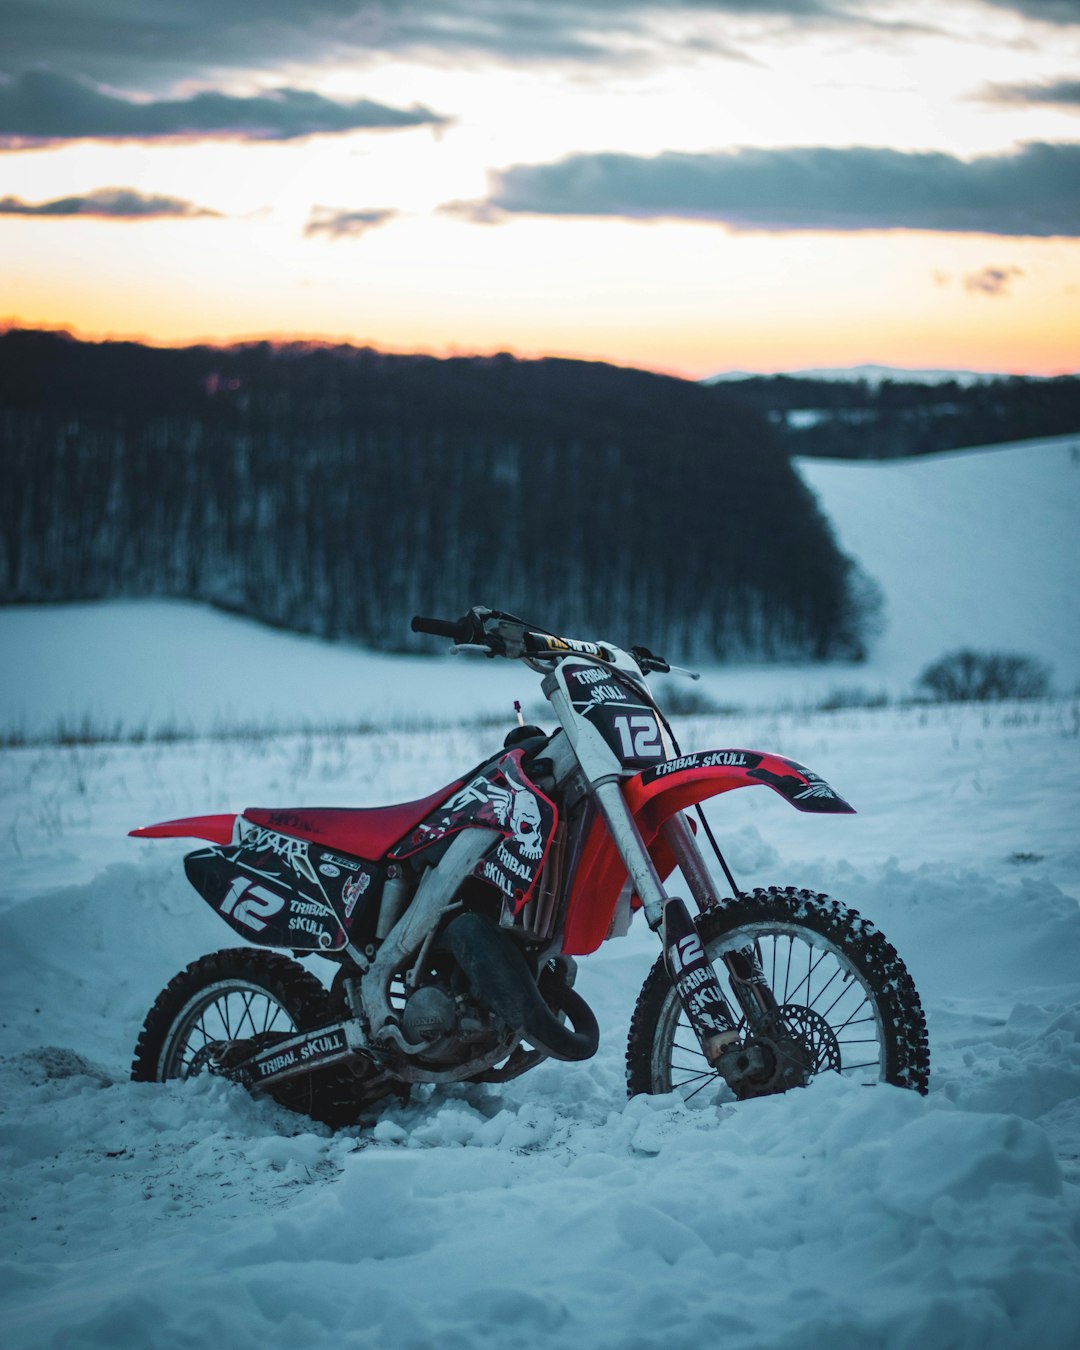 red and black motocross dirt bike on snow covered ground during daytime